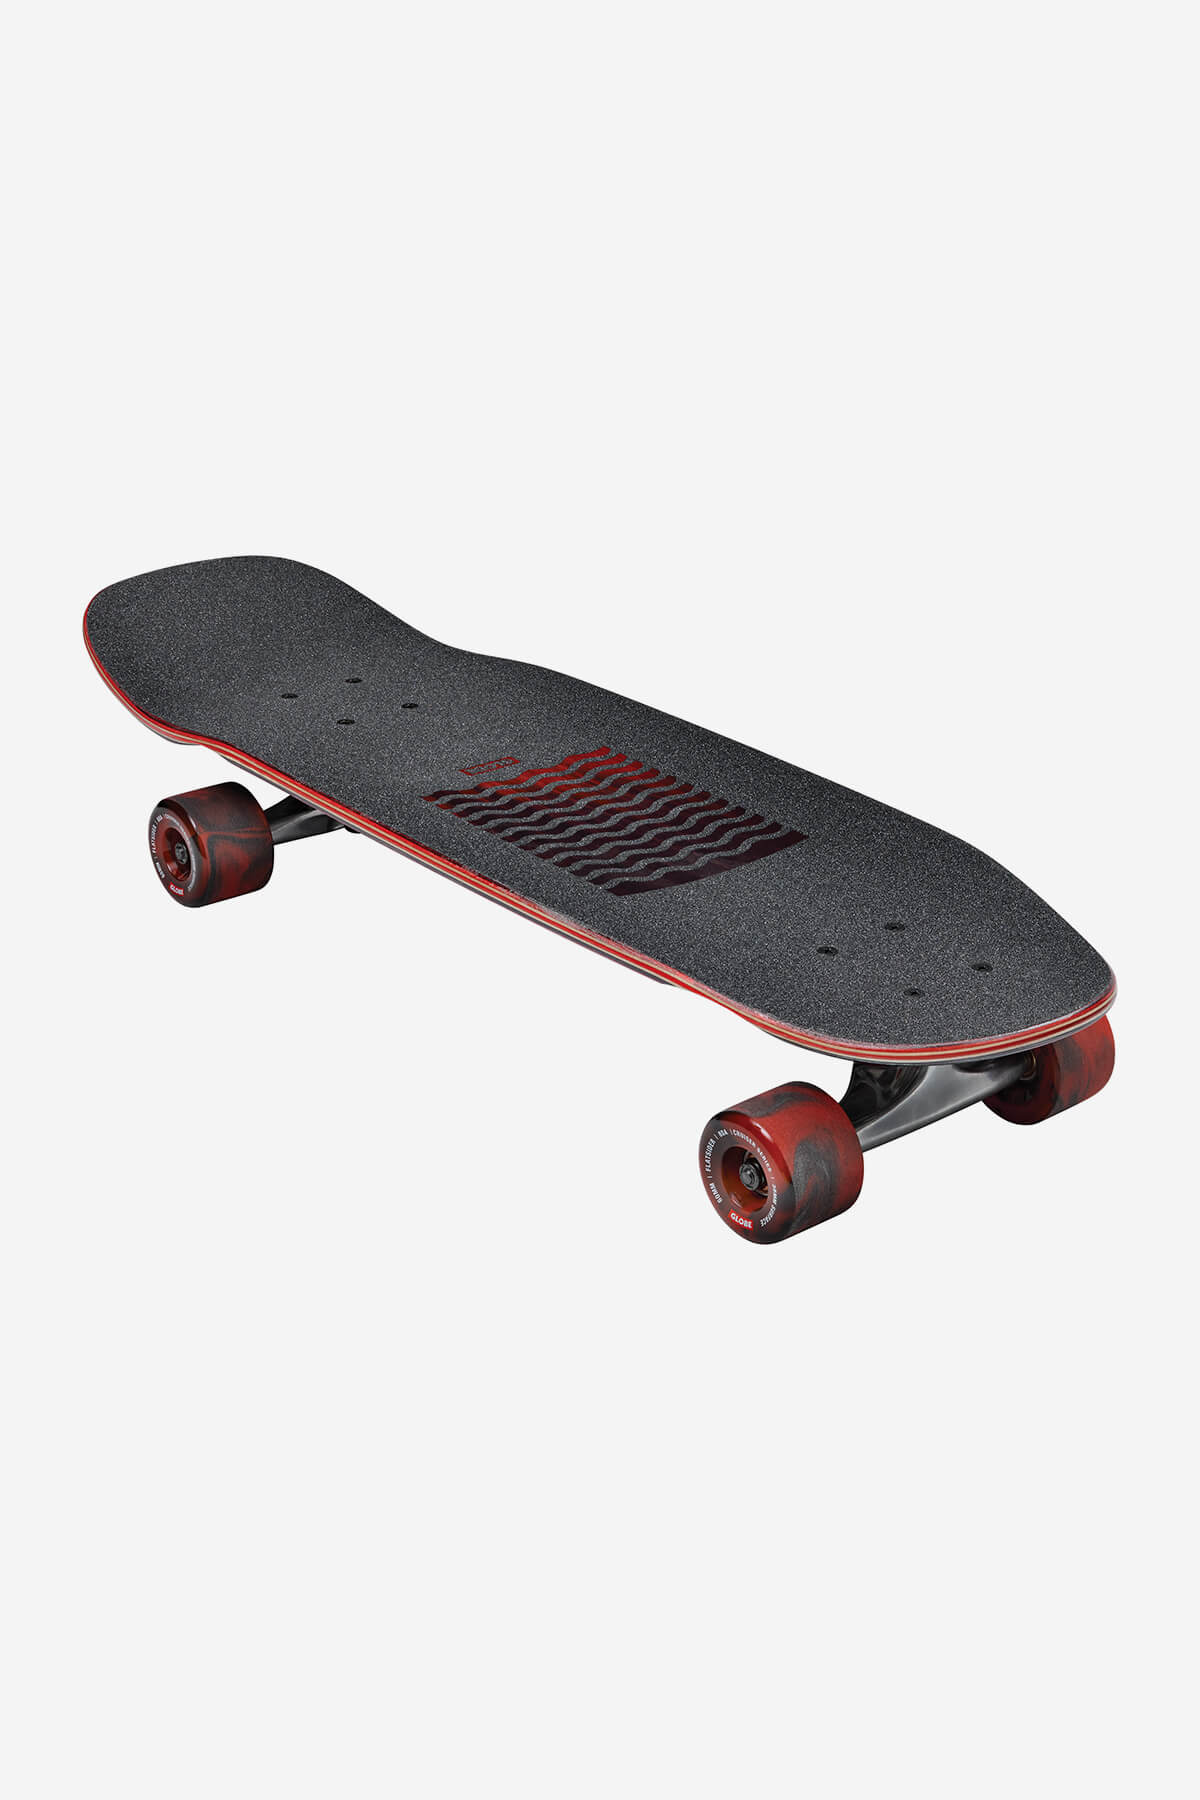 Globe Cruiserboards Outsider - 27" Cruiserboard in Hellbent/Red